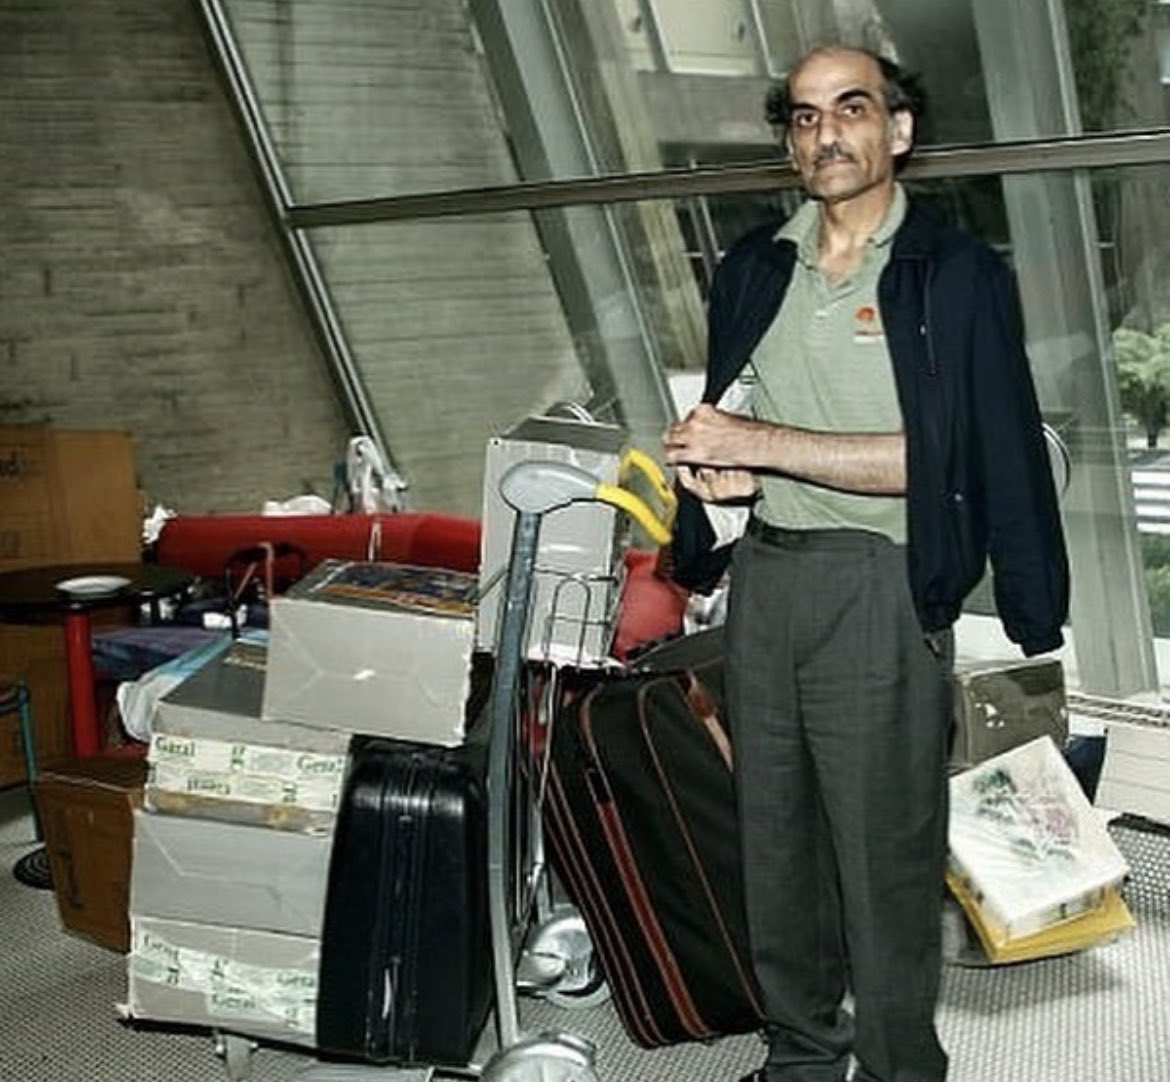 The Man Who Was Stuck in an Airport for 18 Years. Mehran Karimi Nasser (born 1946), also known as Sir Alfred Mehran, is an Iranian refugee who lived in the departure lounge of Terminal One in Charles de Gaulle Airport from August 26, 1988, until July 2006 when he was